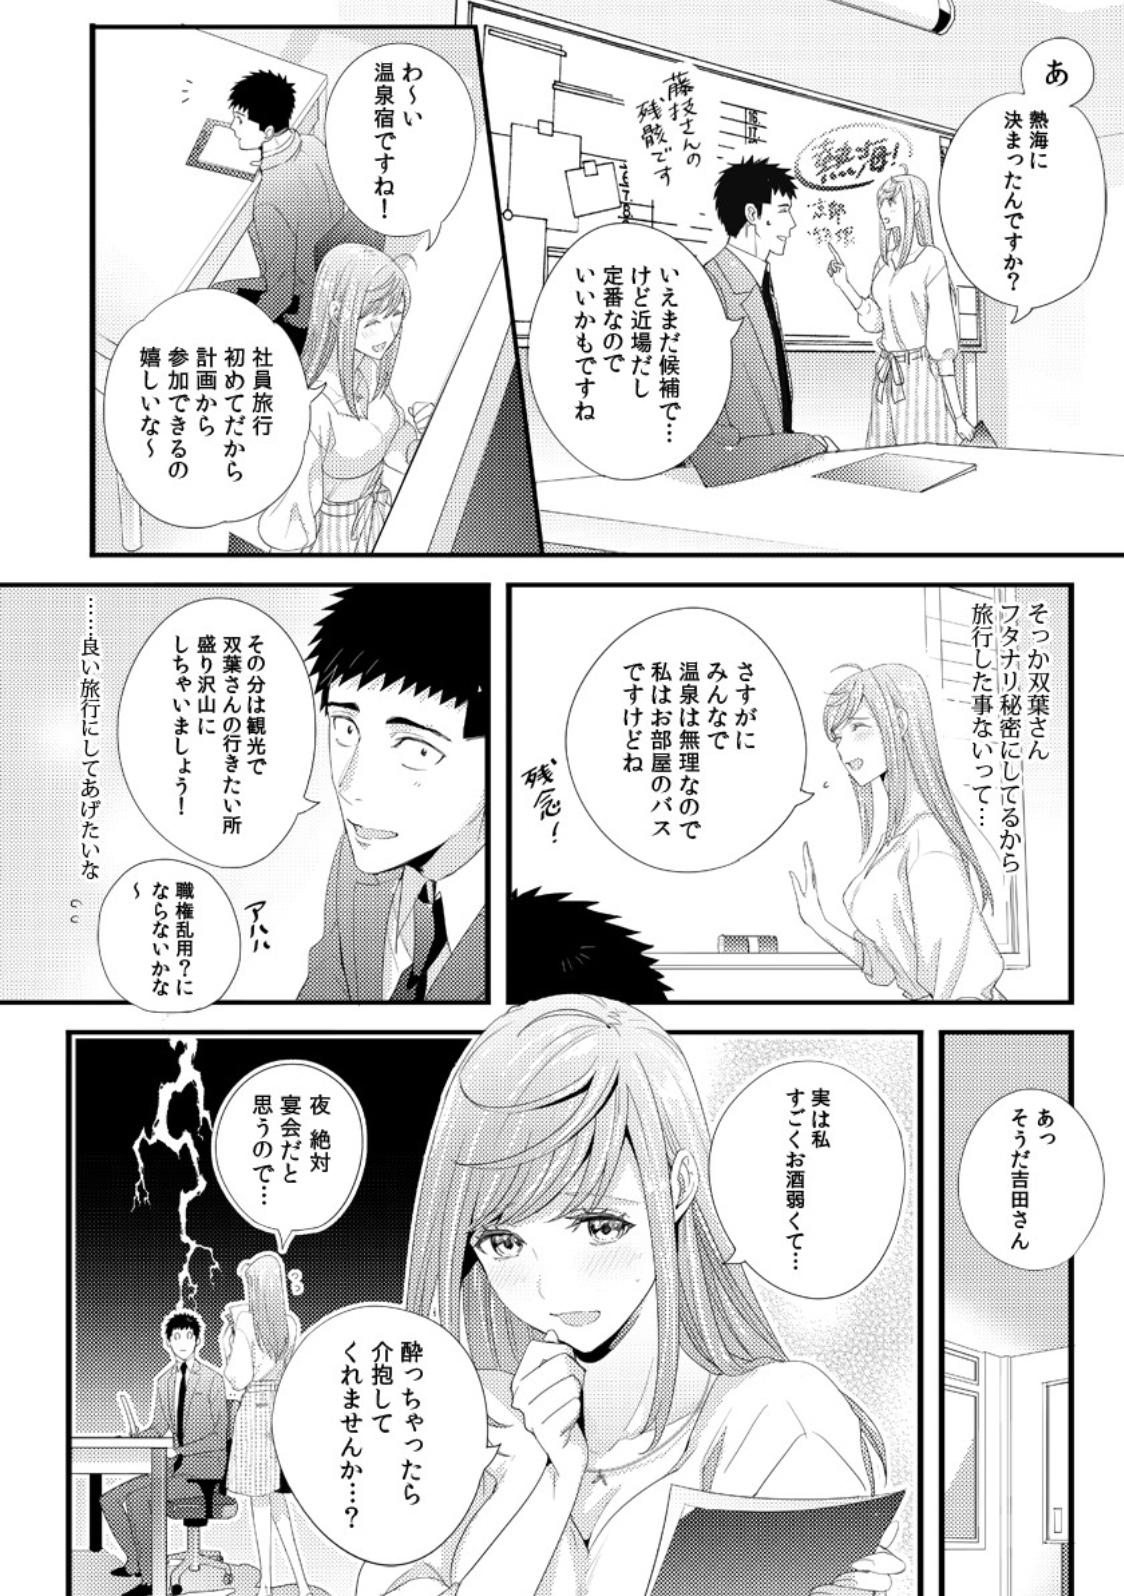 Please Let Me Hold You Futaba-San! Ch. 1-4 6